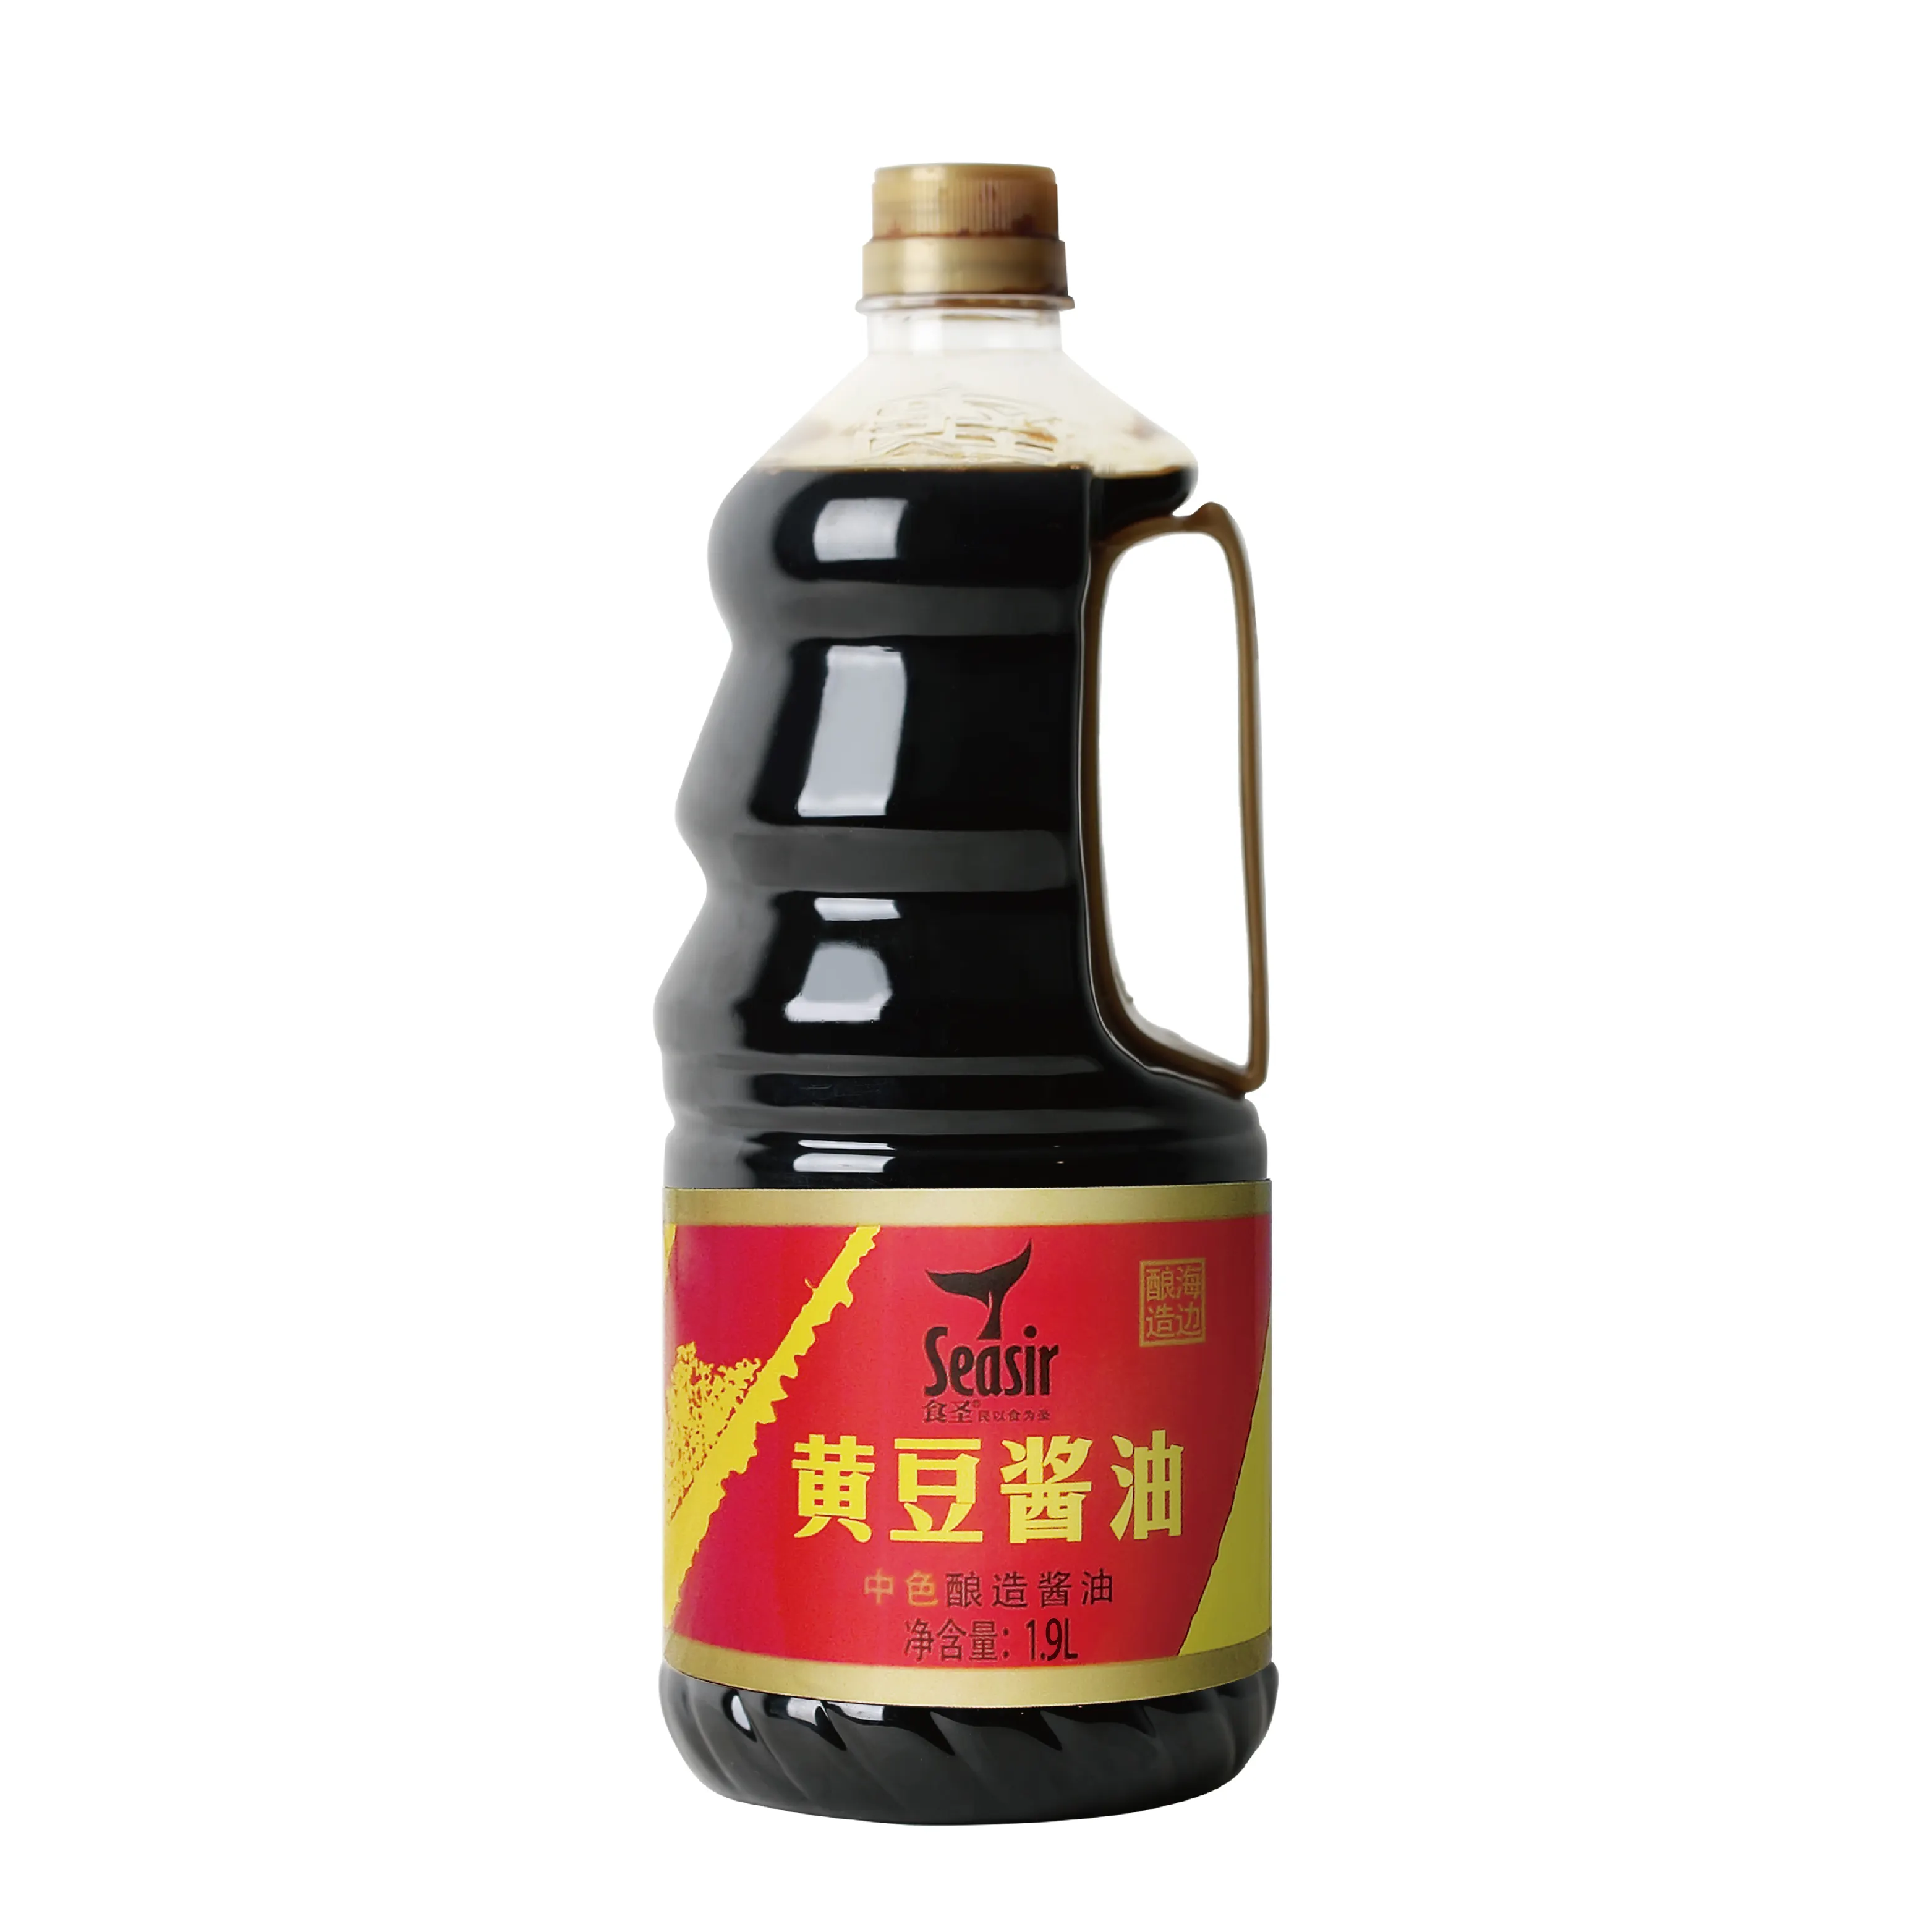 Soy saucee light soy sauce for healthy cooking cuisine recipes kitchen flavoring soy sauce1.3L